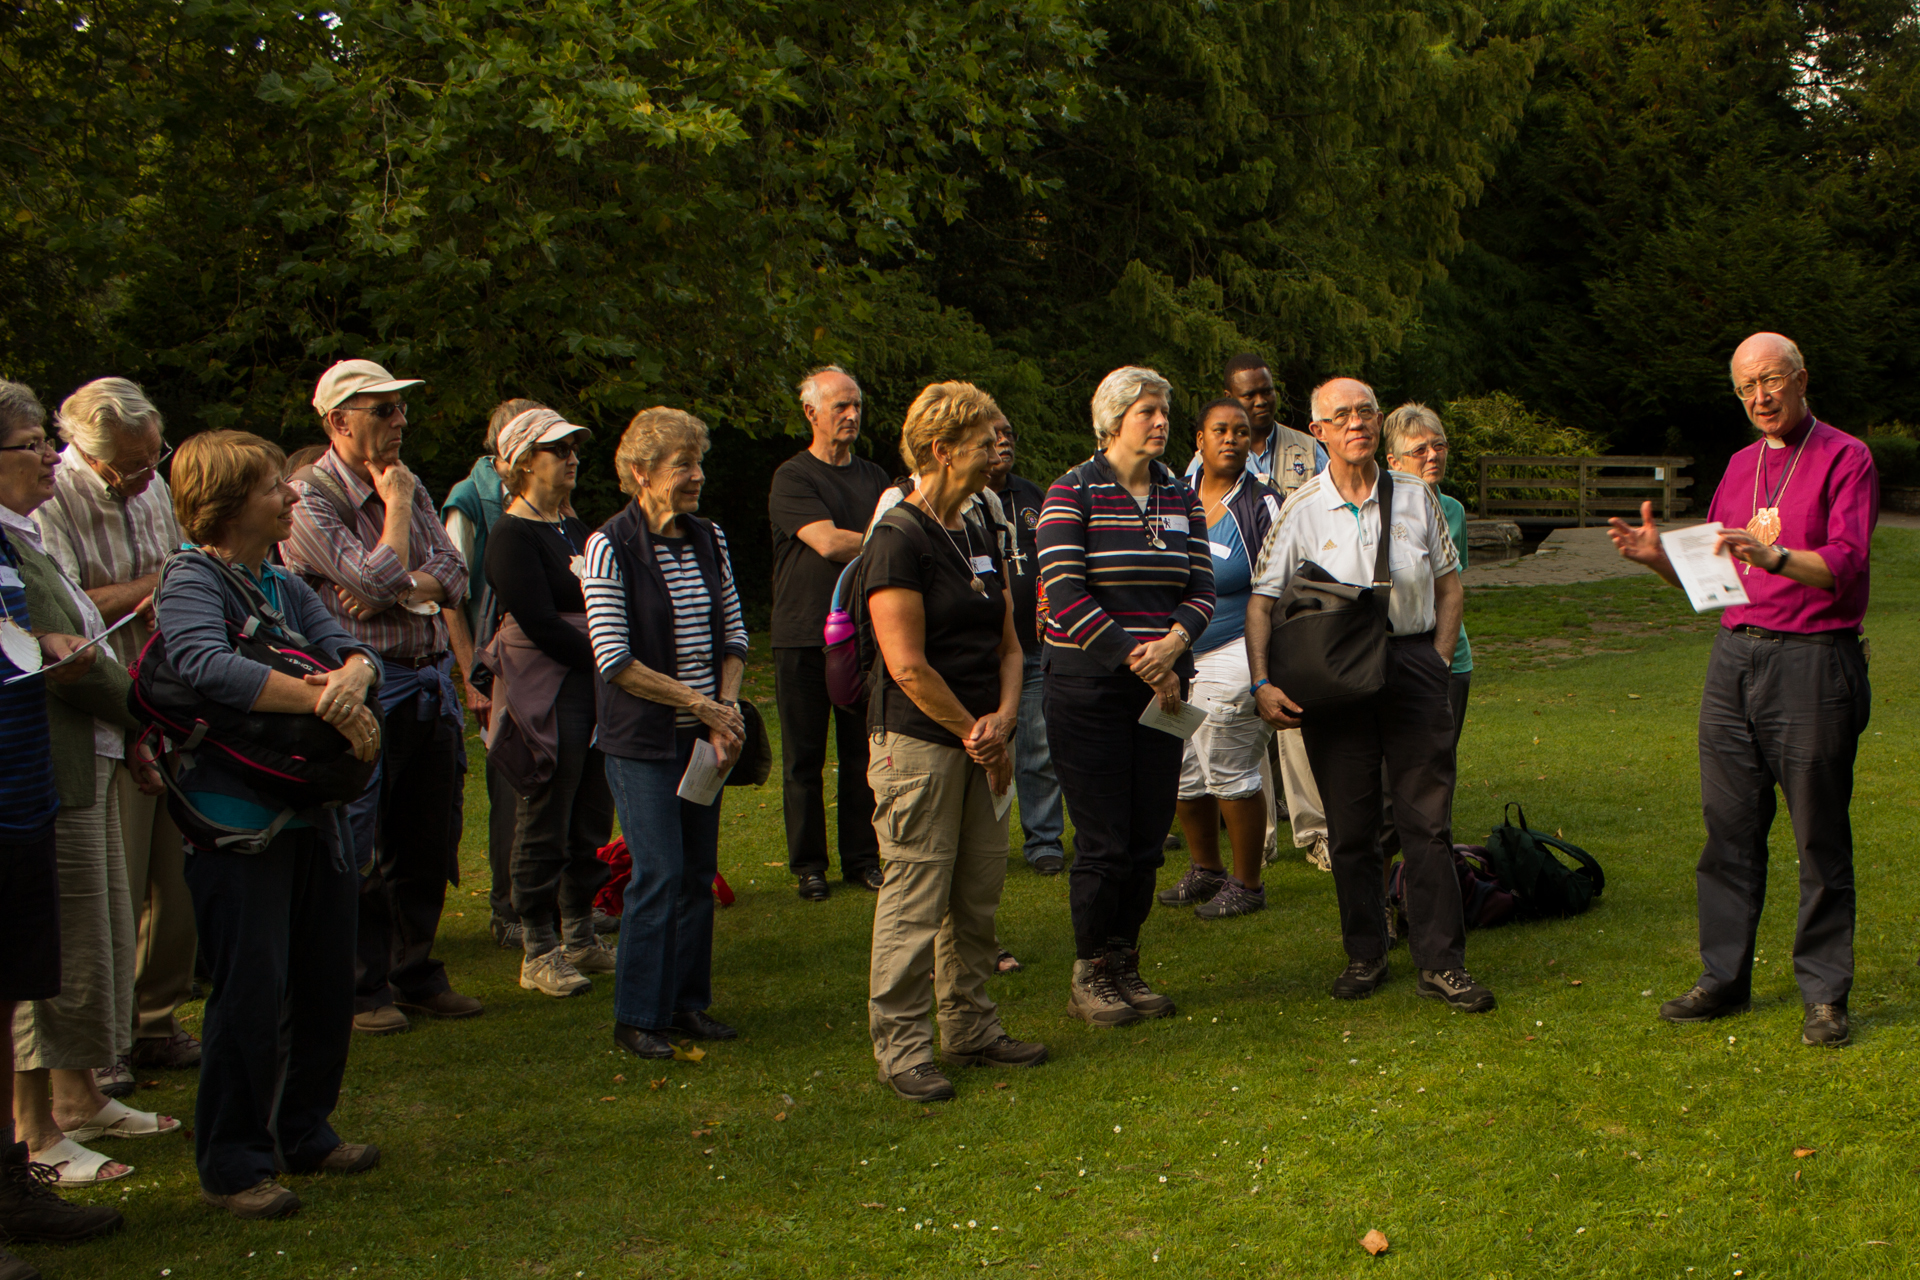 As the day drew to a close, Bishop John led an informal worship session on Ray Mill Island.